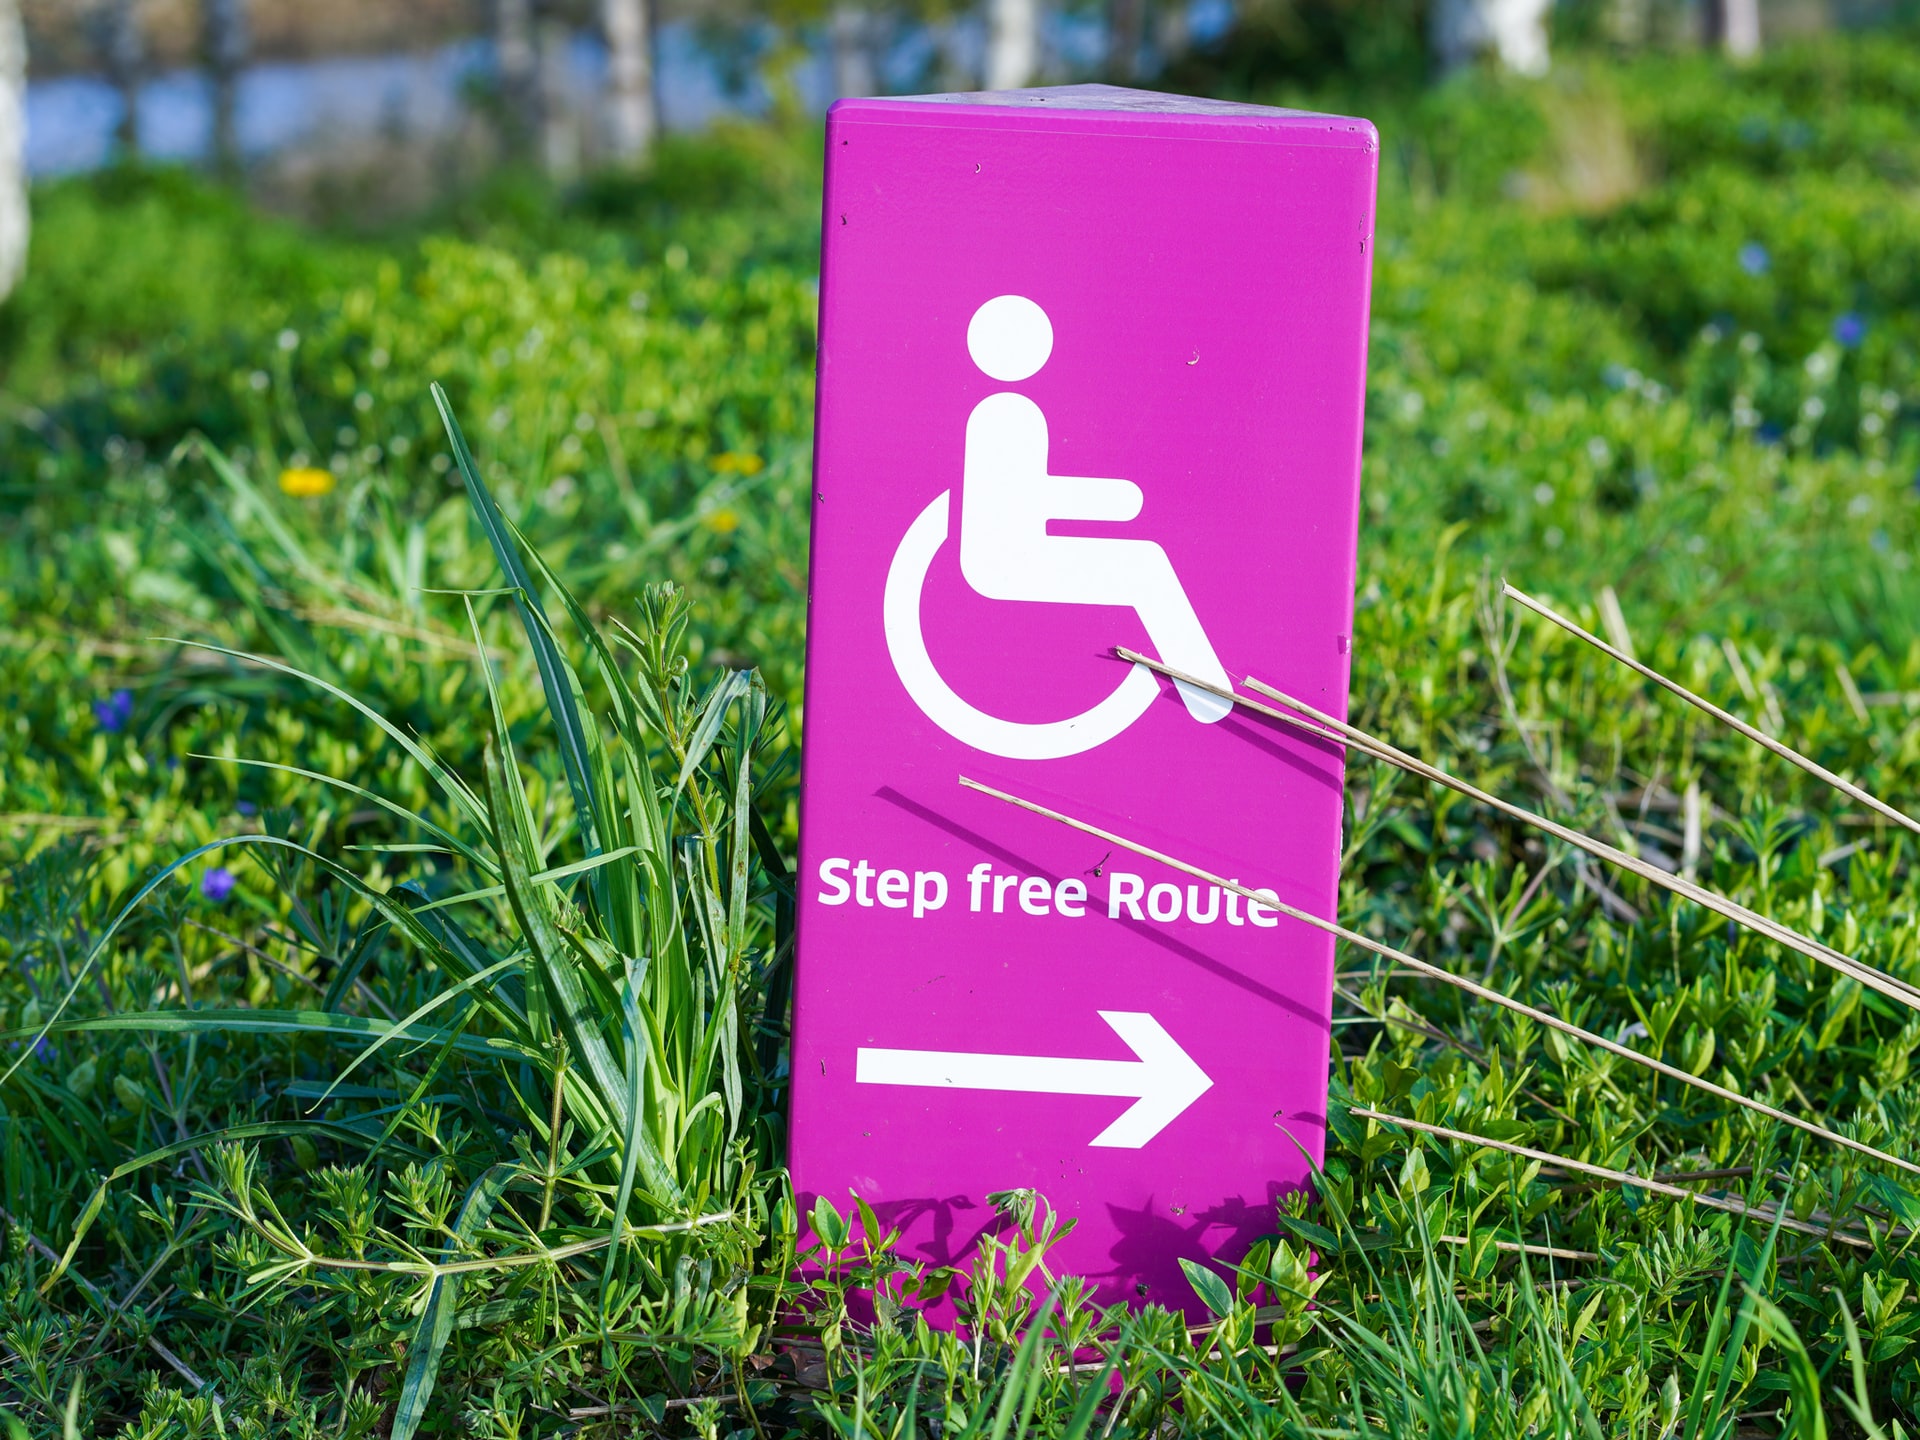 step free route sign.jpg